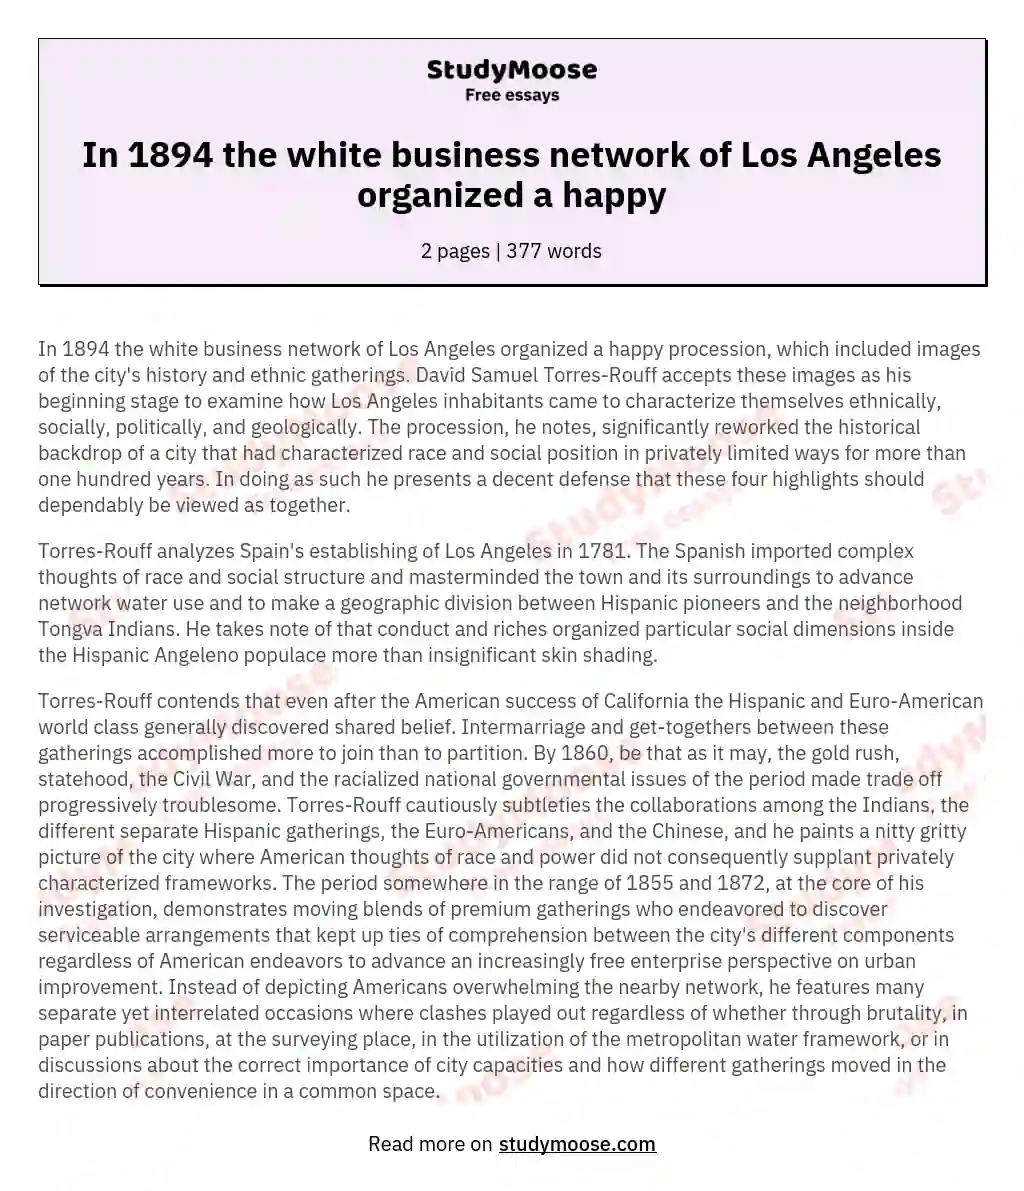 In 1894 the white business network of Los Angeles organized a happy